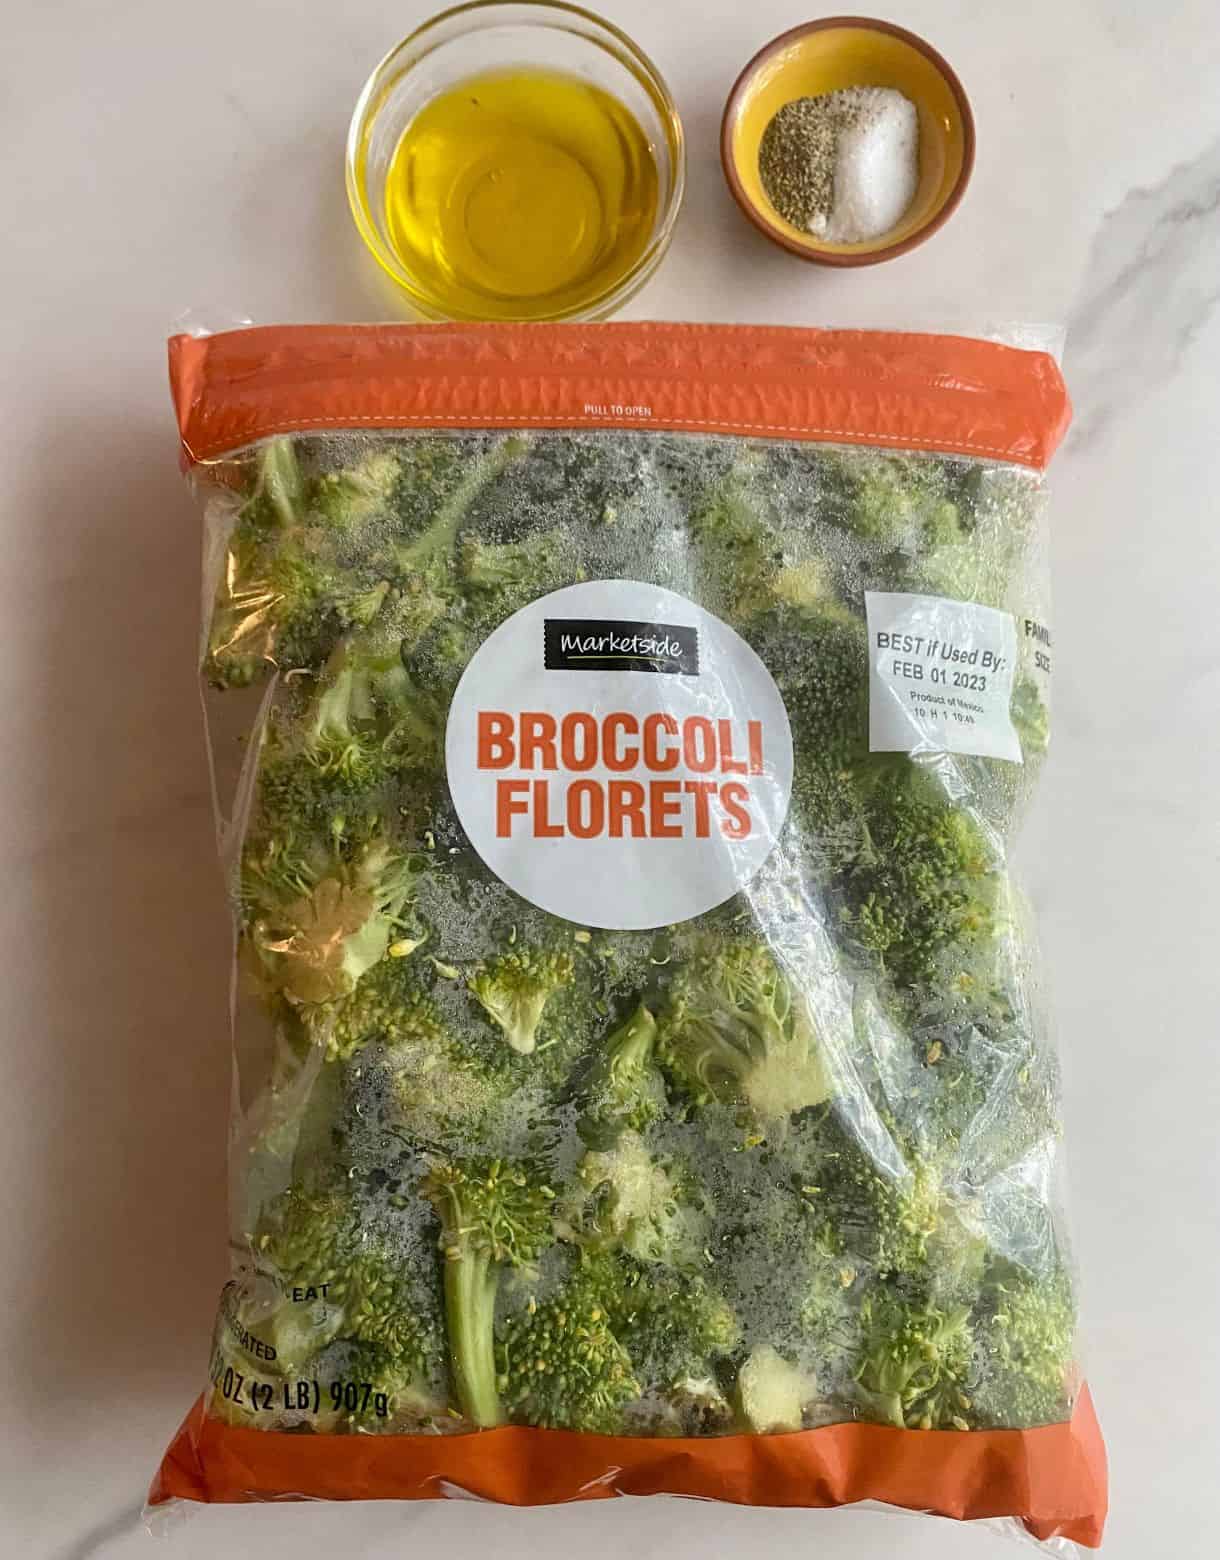 Ingredients for Roasted Sheet Pan Broccoli. Olive oil, salt, pepper and broccoli.